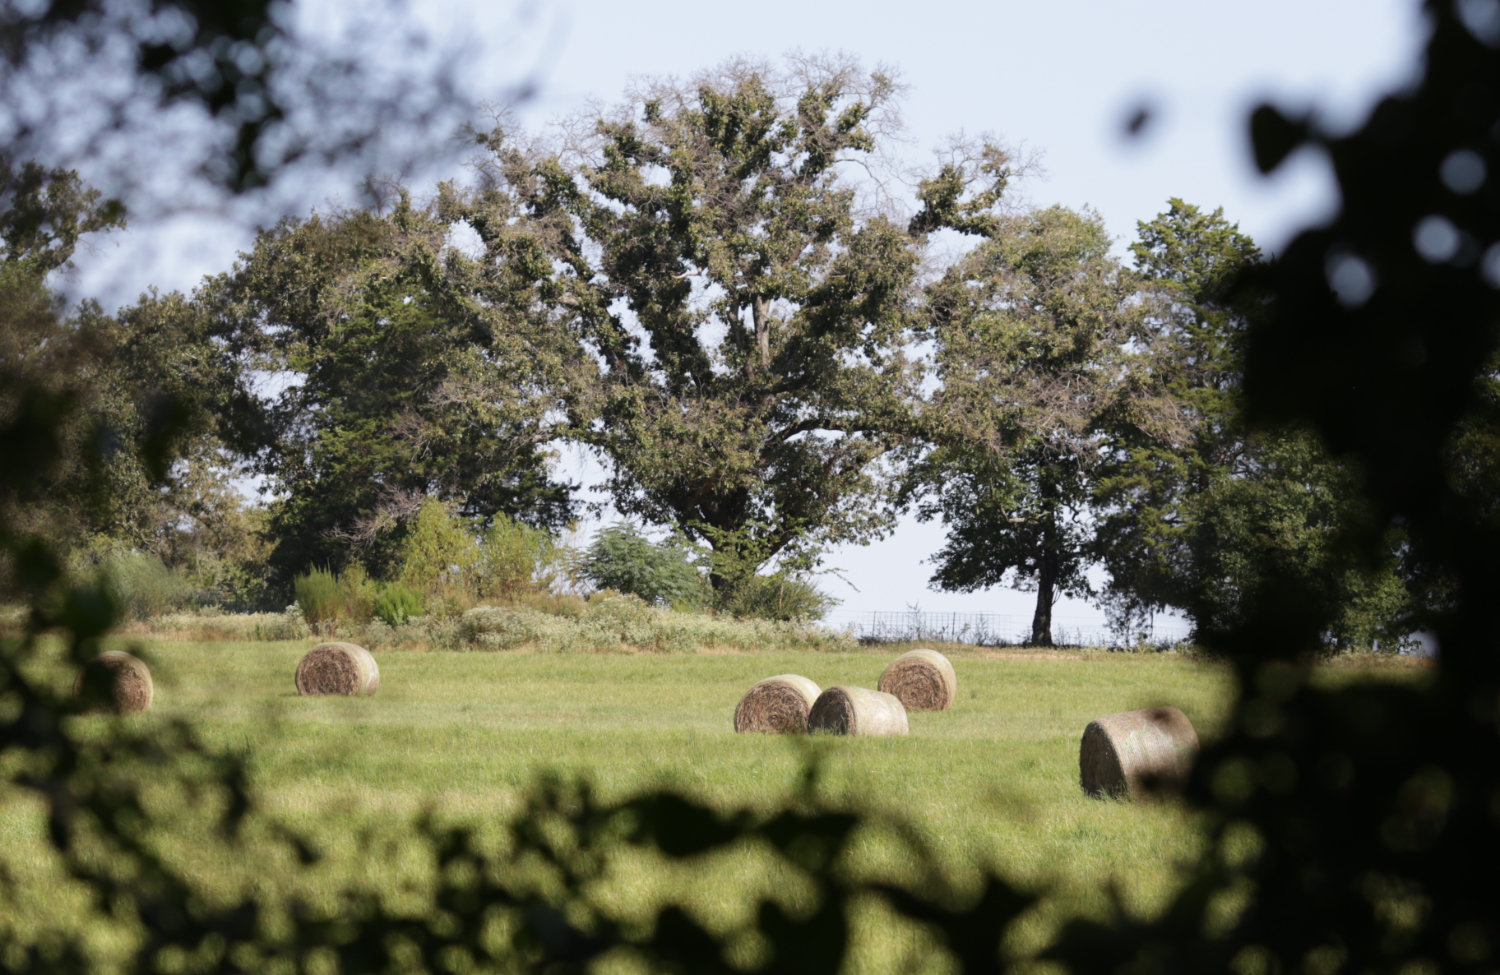 A hayfield viewed from a break in the cedars along a fence row.